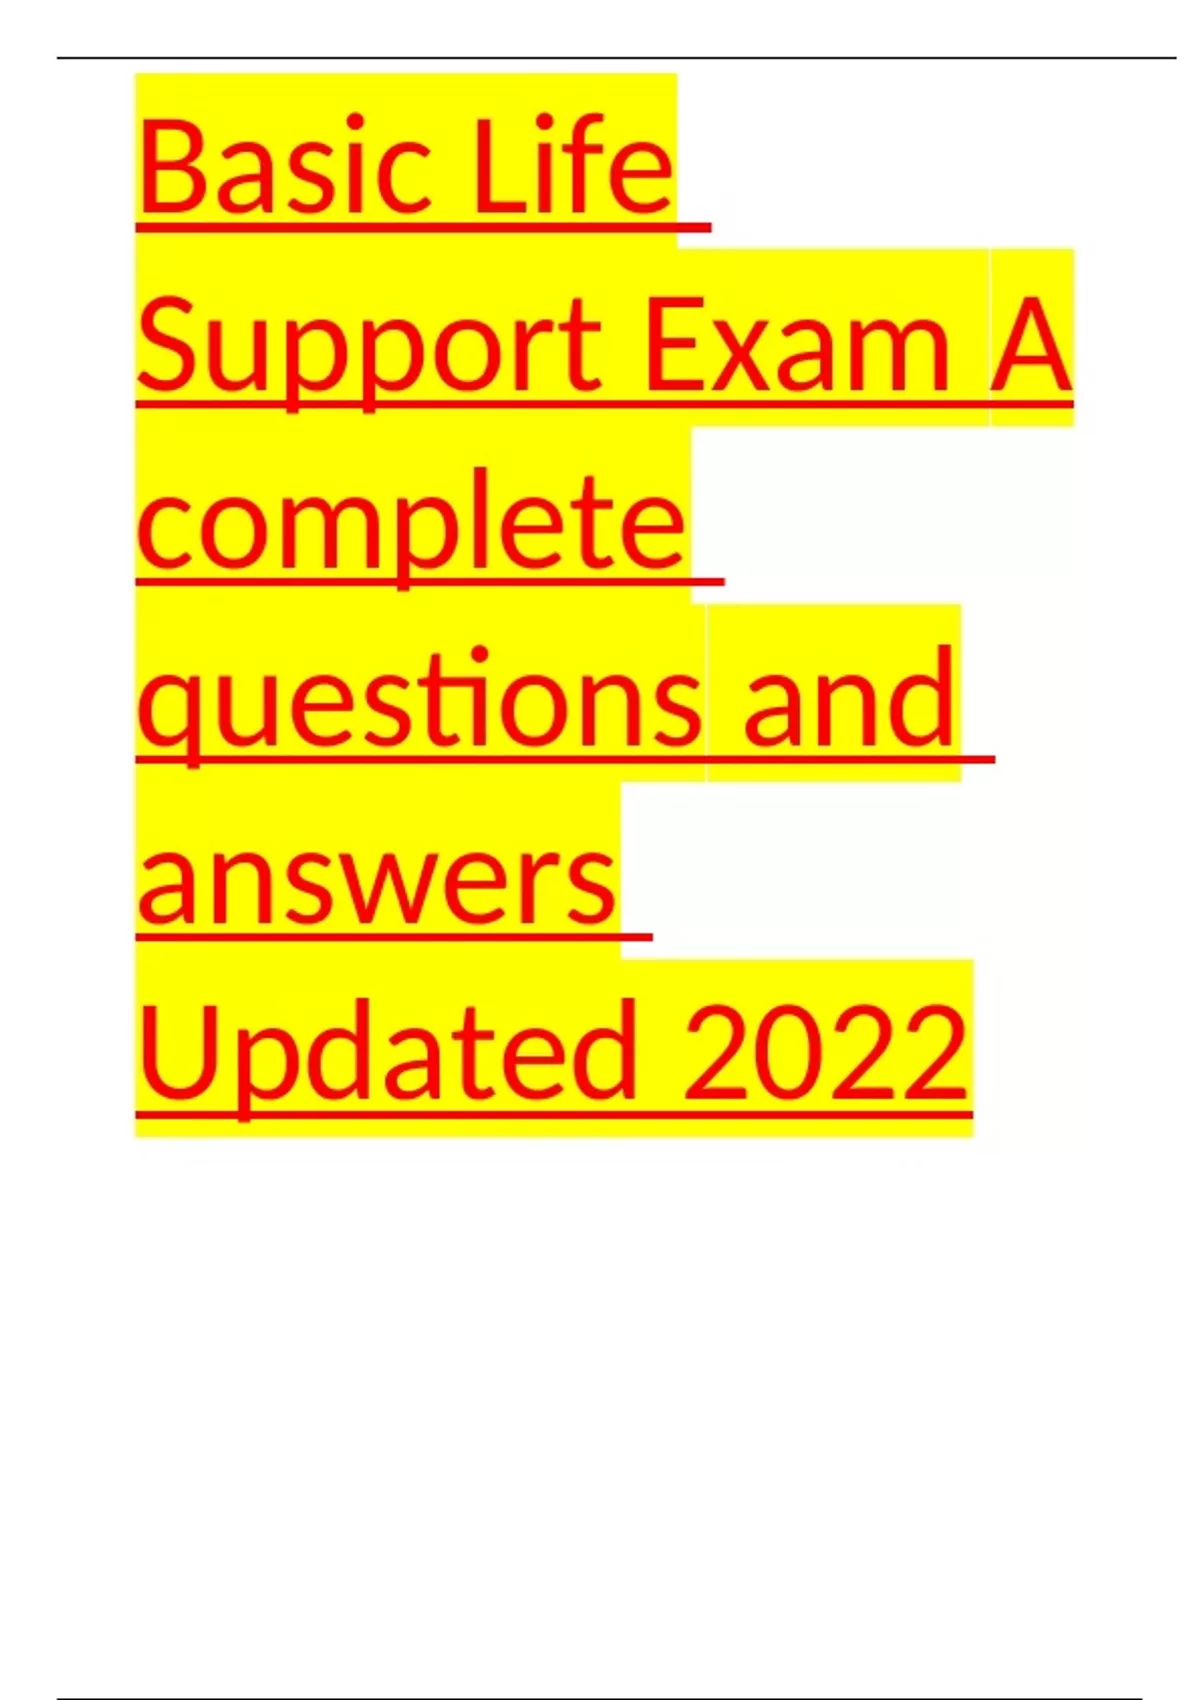 Basic Life Support Exam A (25 Questions with Answers) Updated 2022